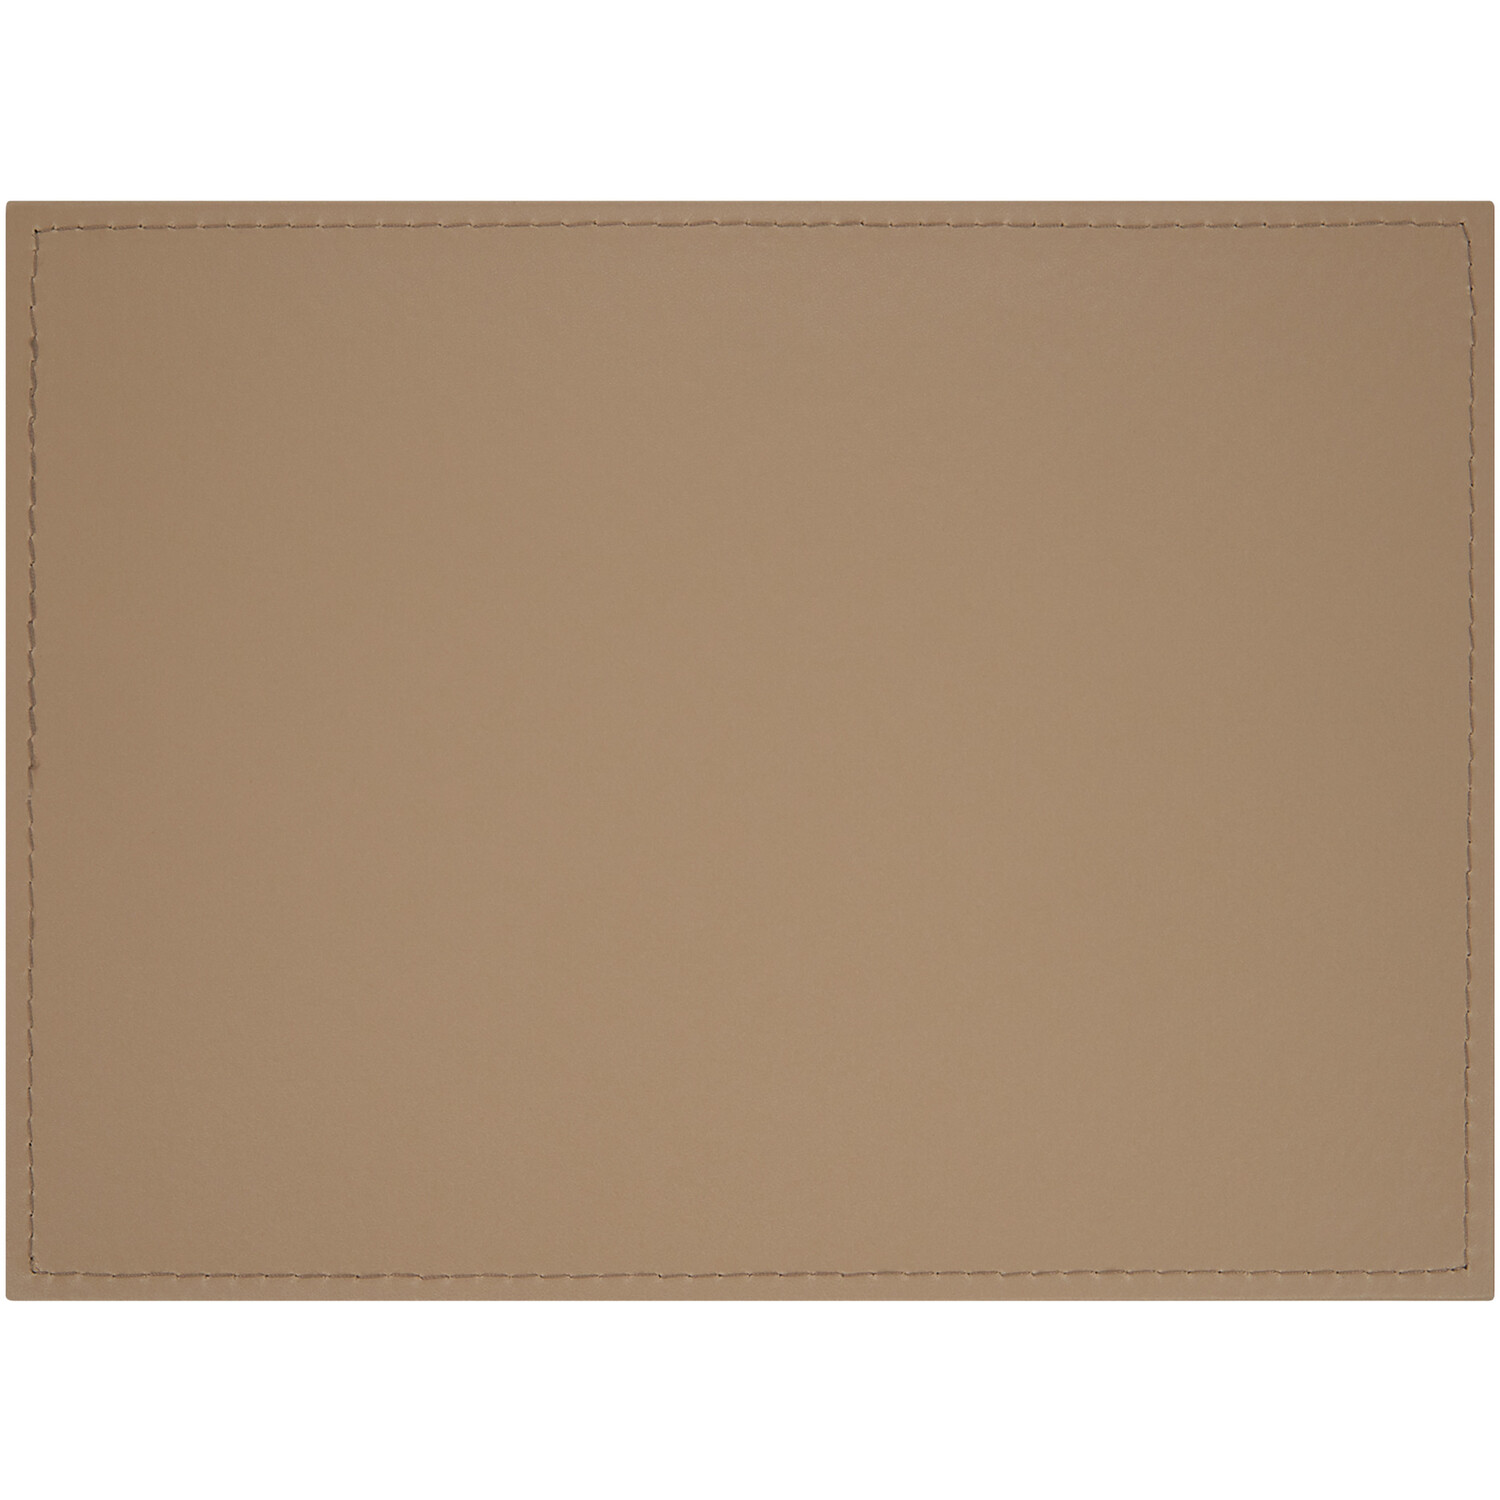 Pack of 4 Soft Touch Linen Effect Placemats - Brown Image 4